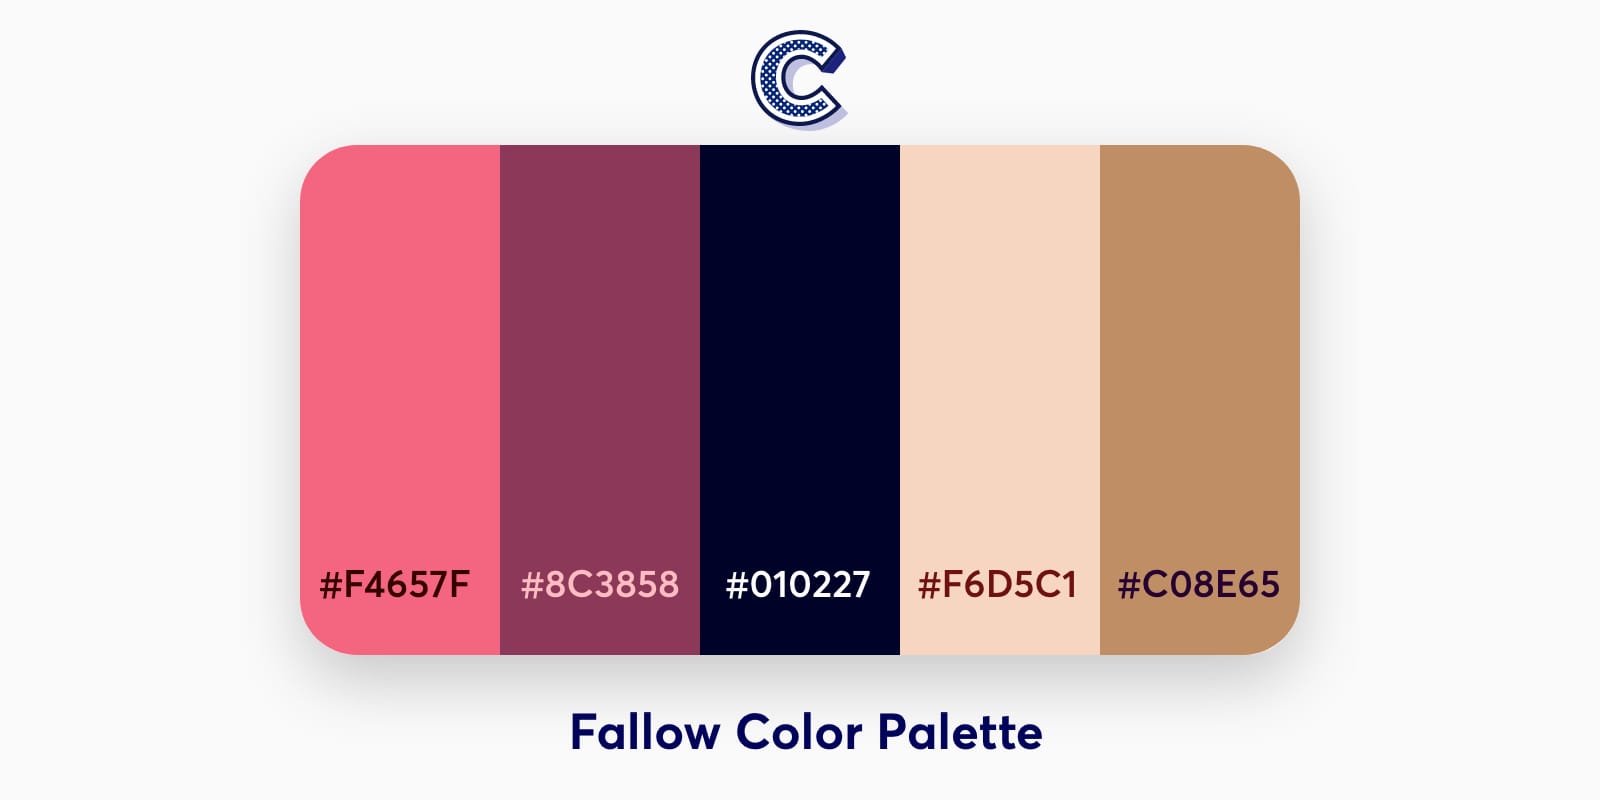 the featured image of fallow color palette